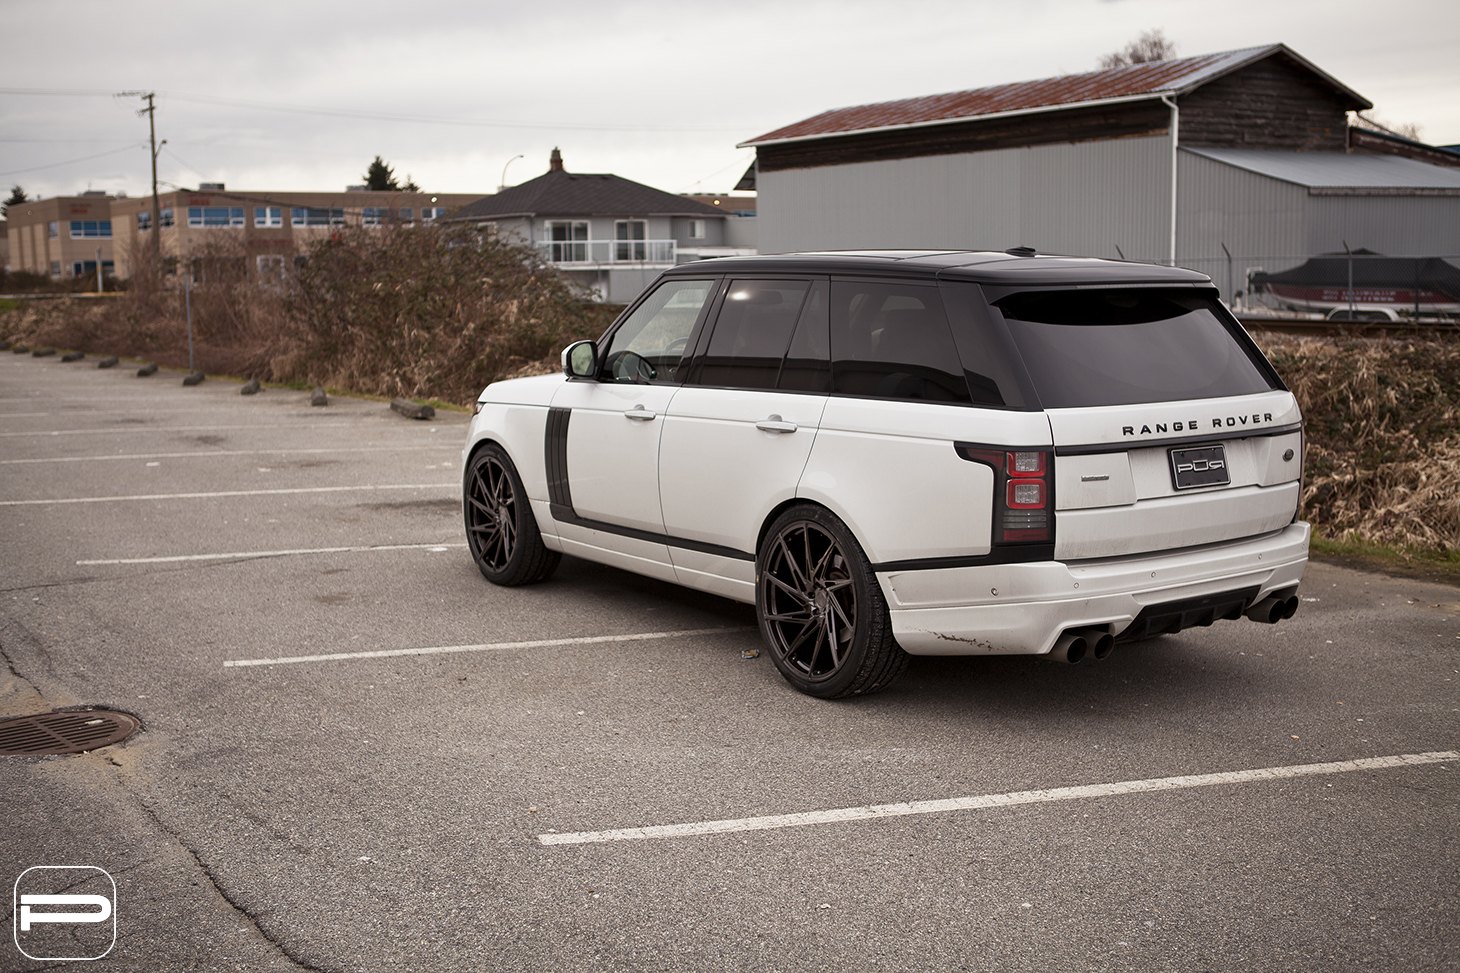 Anthracite PUR Wheels on White Range Rover - Photo by PUR Wheels